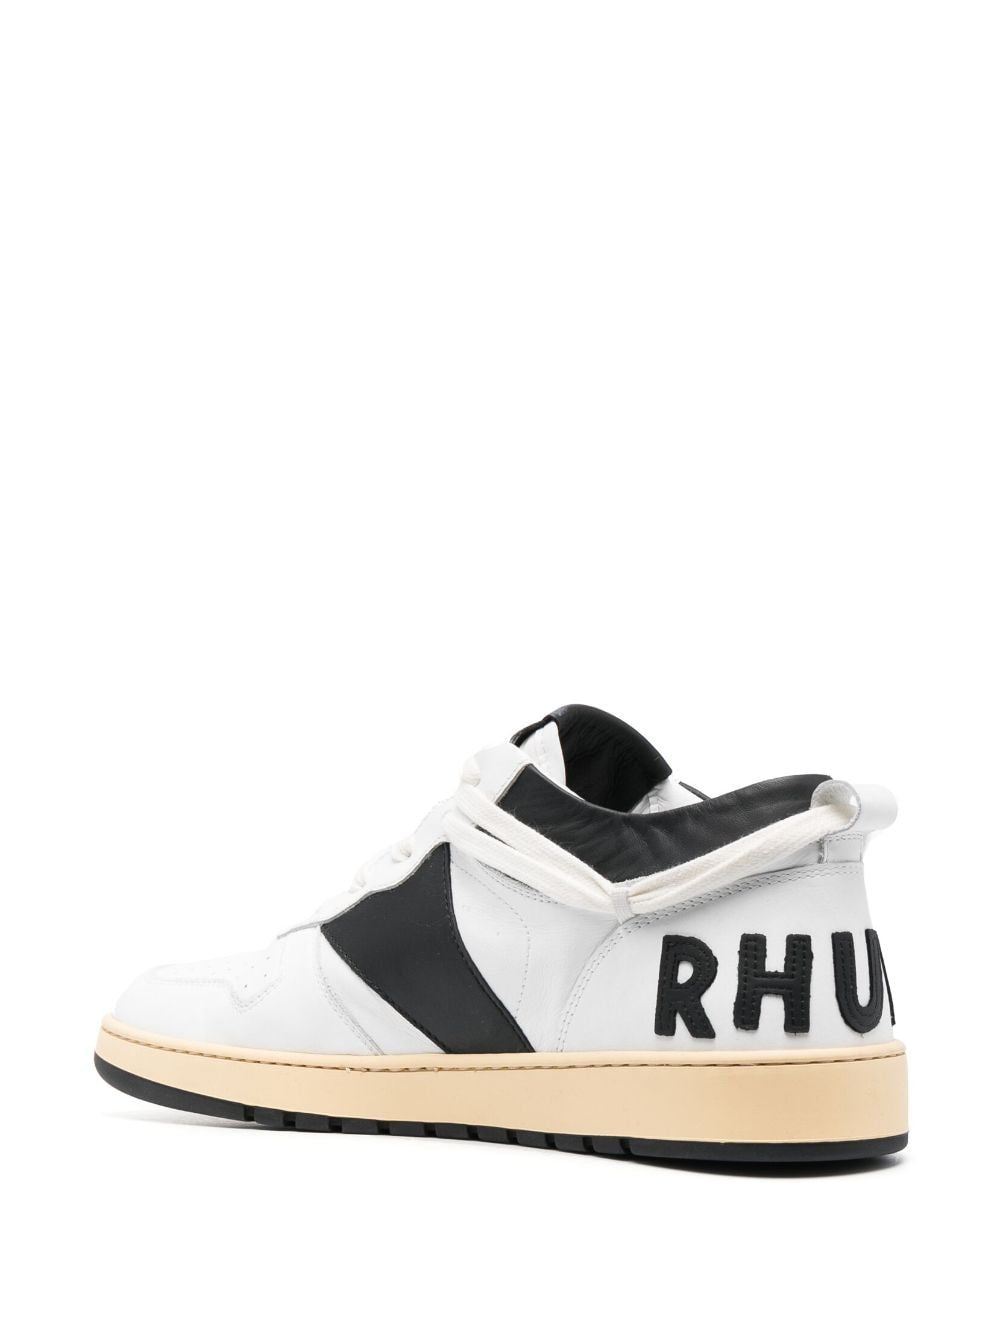 RHUDE Men's White Leather Sneakers - FW23 Collection